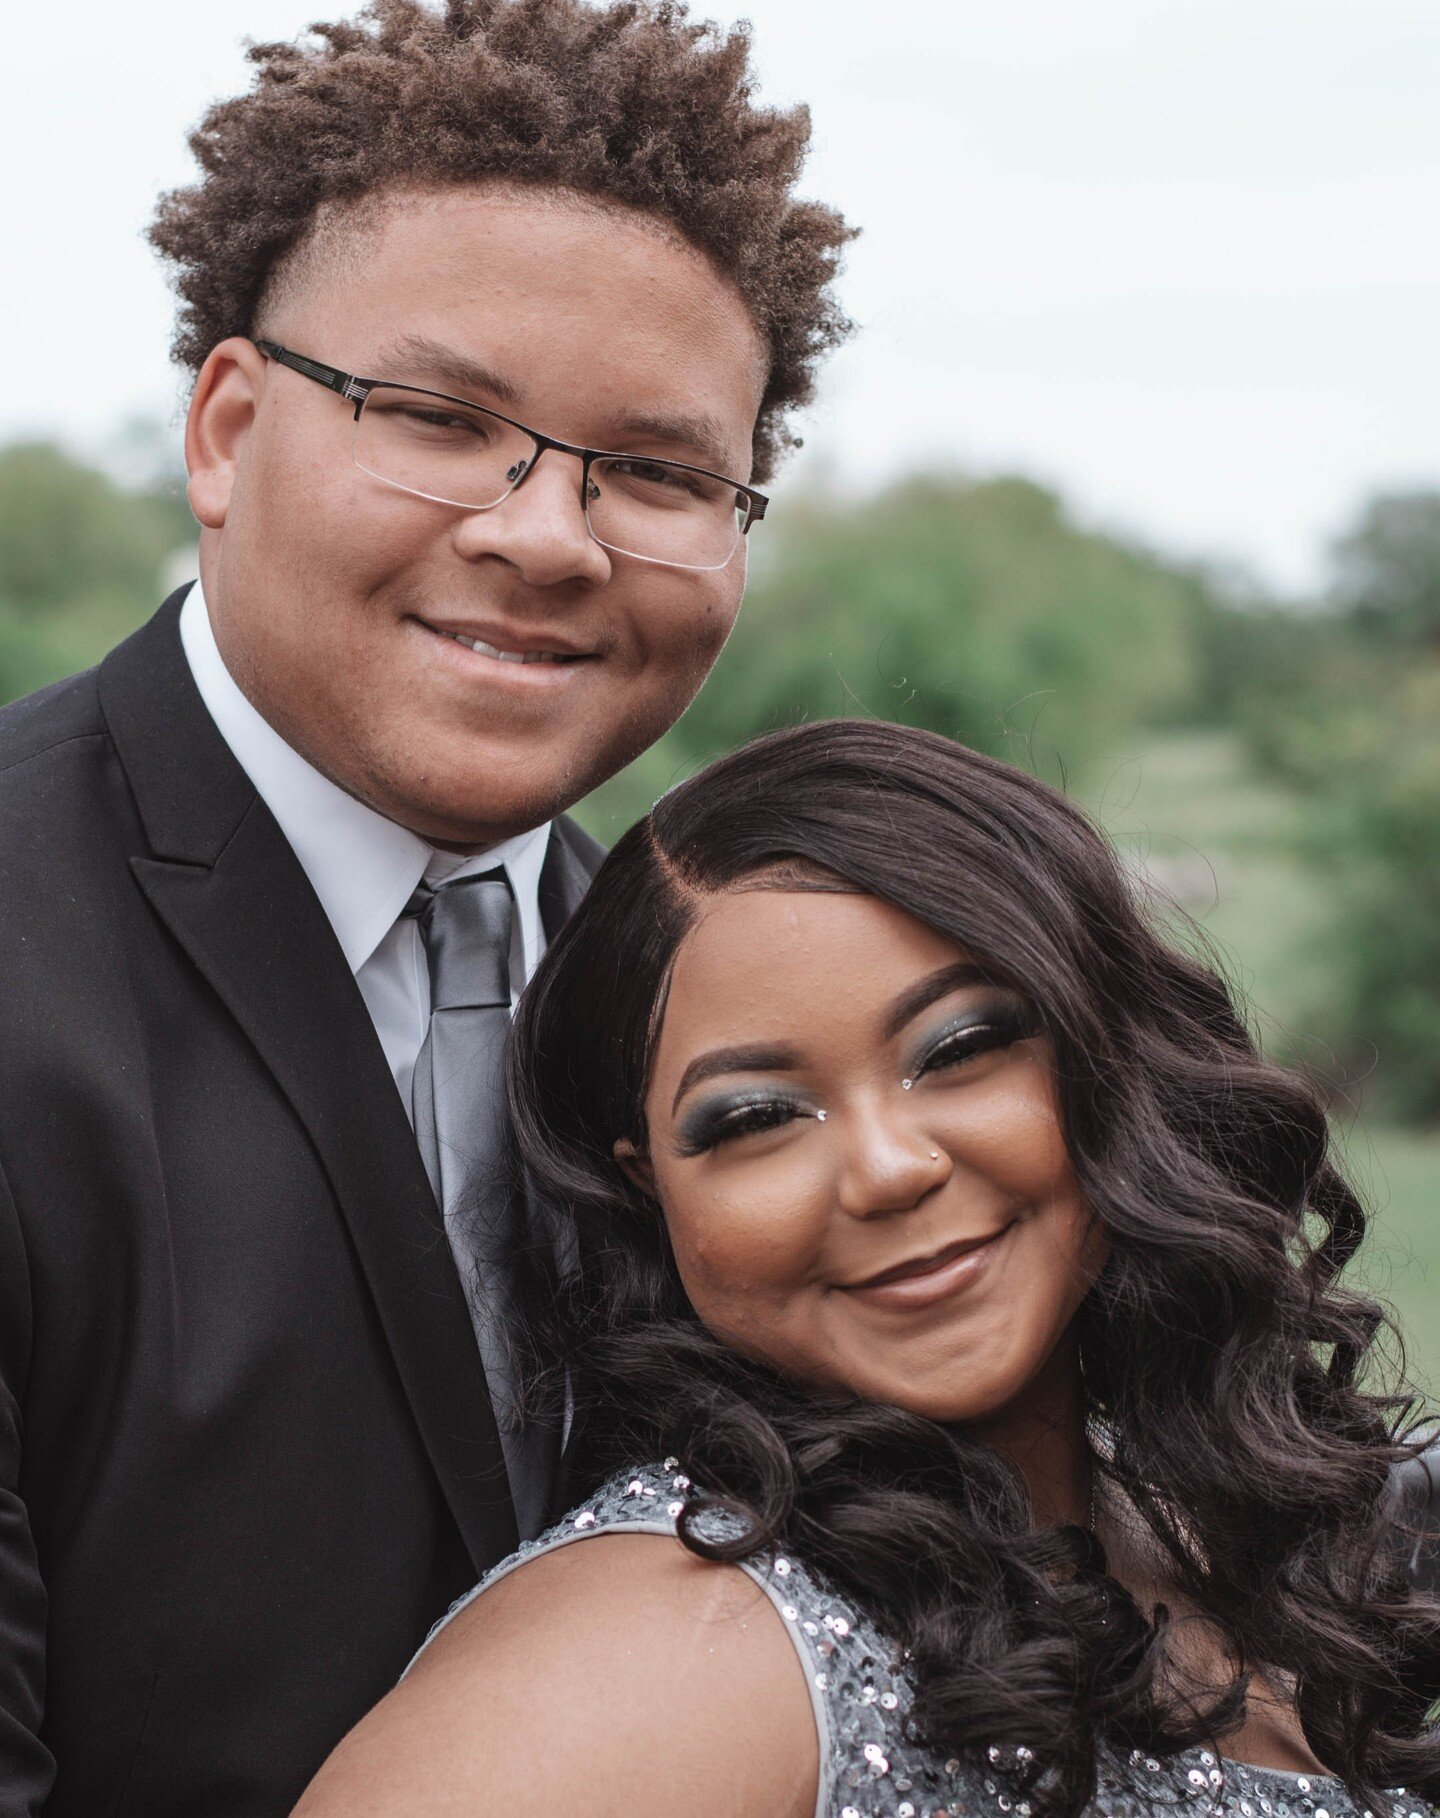 Another completed prom session.😮
It has been a joy photographing all of these beautiful couples!